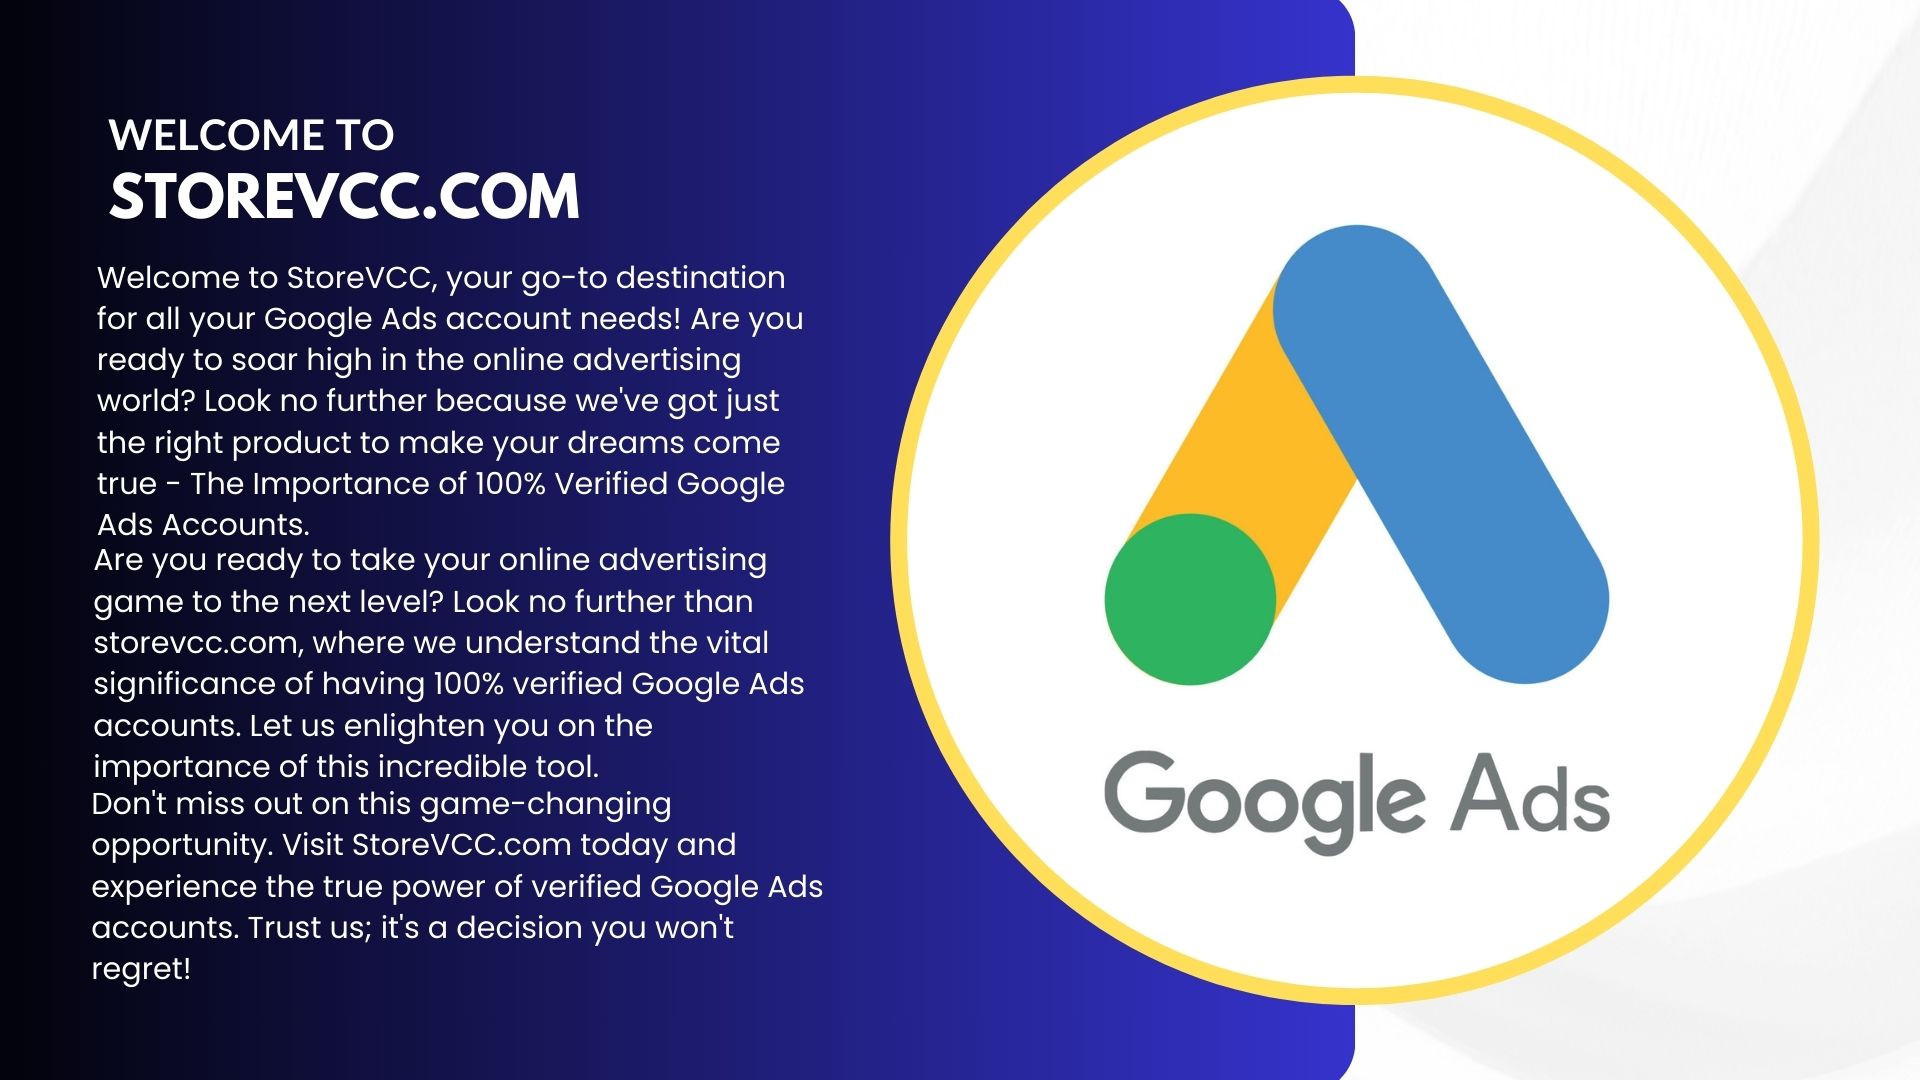 The Importance of 100% Verified Google Ads Accounts